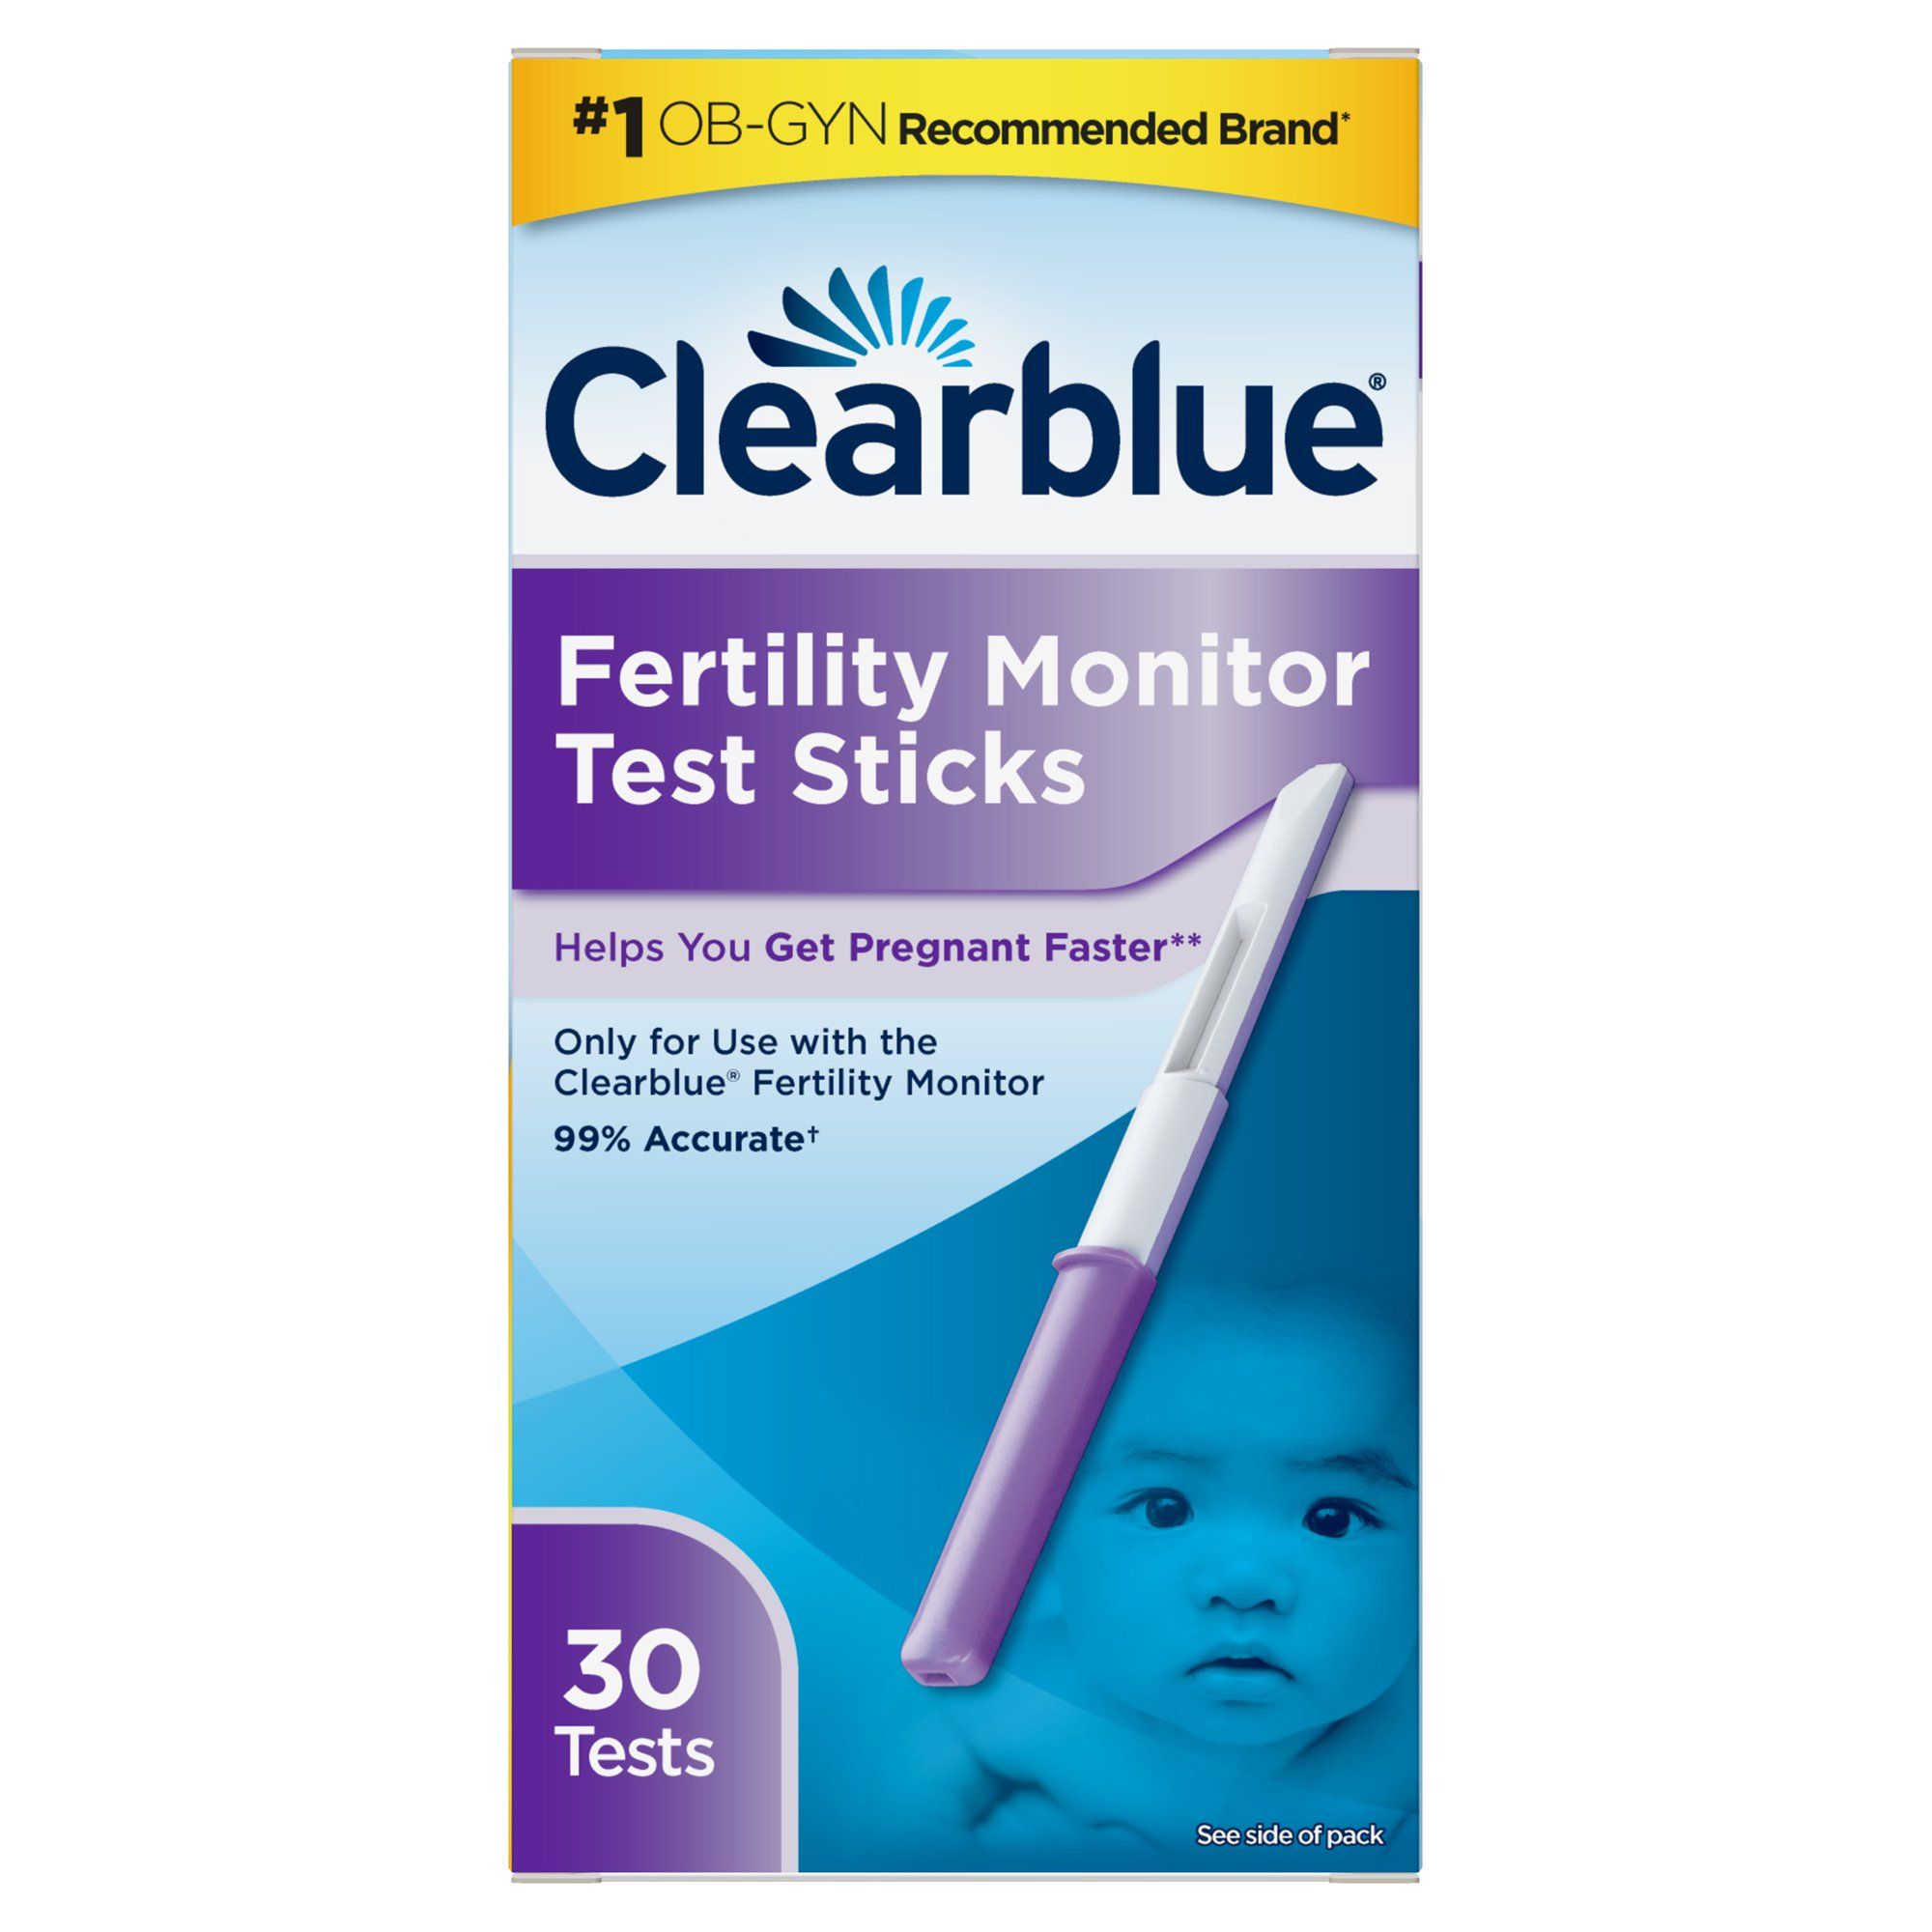 Clearblue Fertility Monitor Test Sticks, 30 ct, Get Pregnant Faster* | Walmart (US)